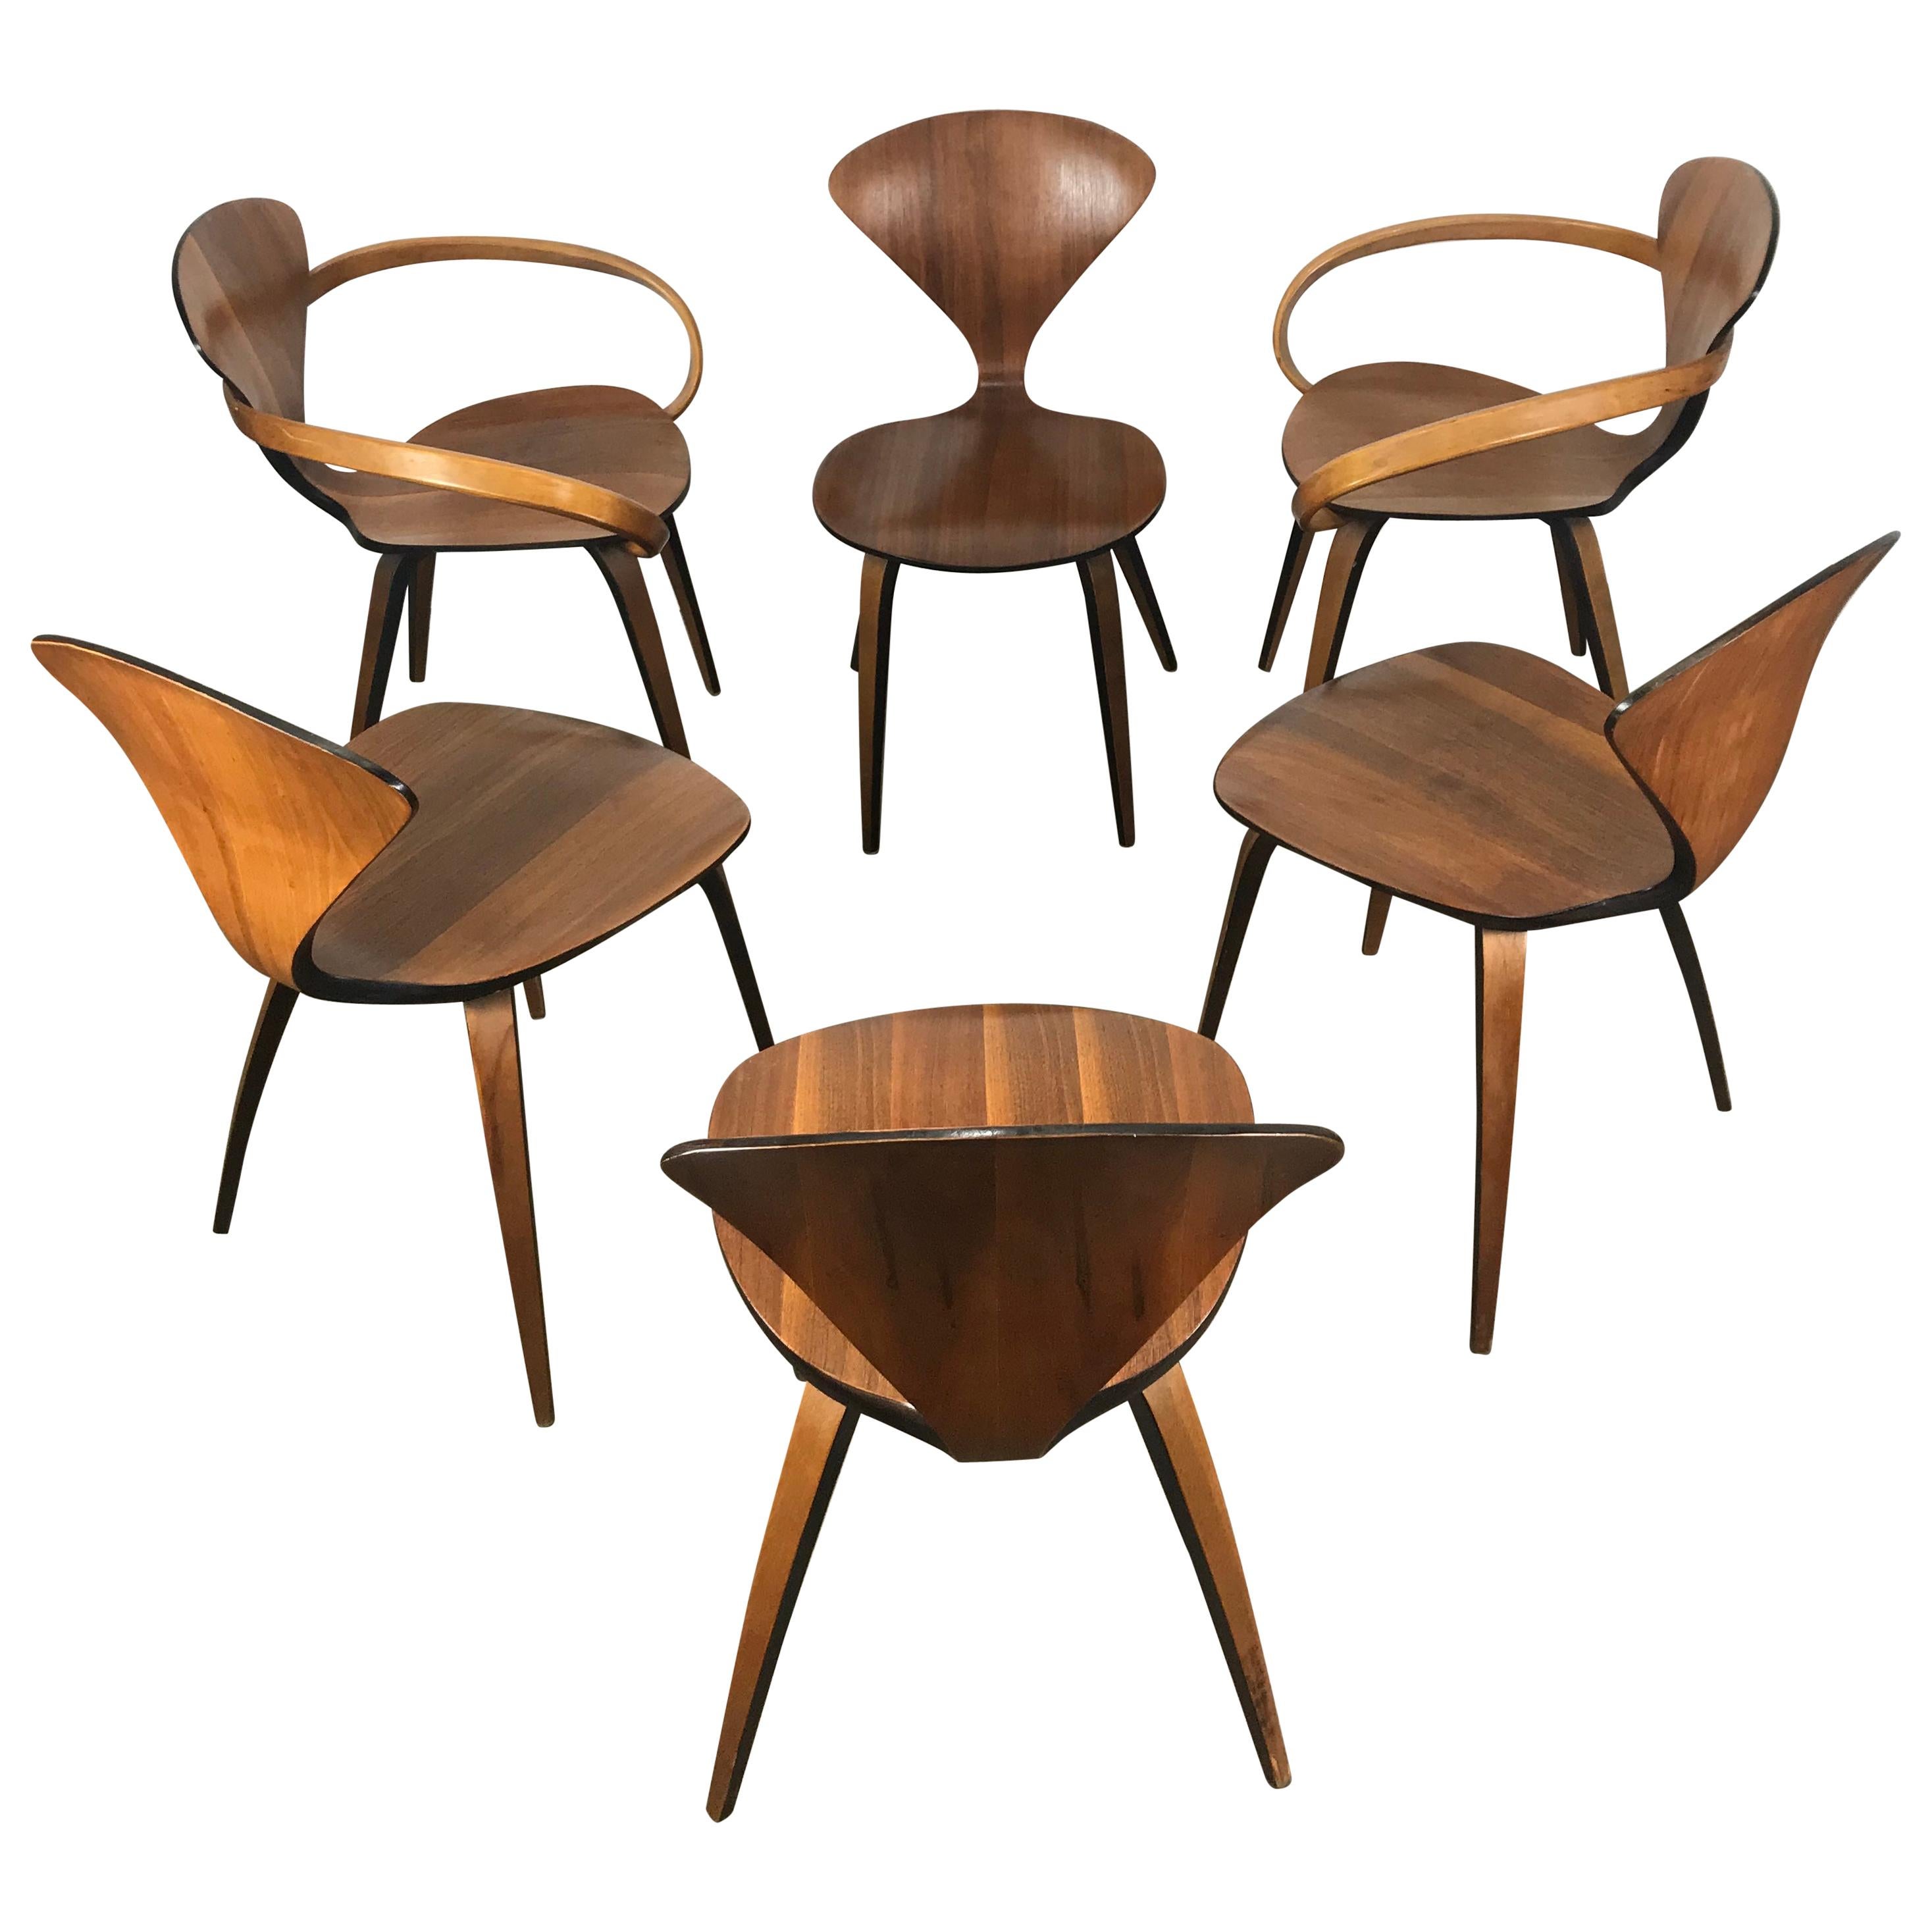 Classic Set of 6 Dining Chairs by Norman Cherner for Plycraft, Pretzel Captain